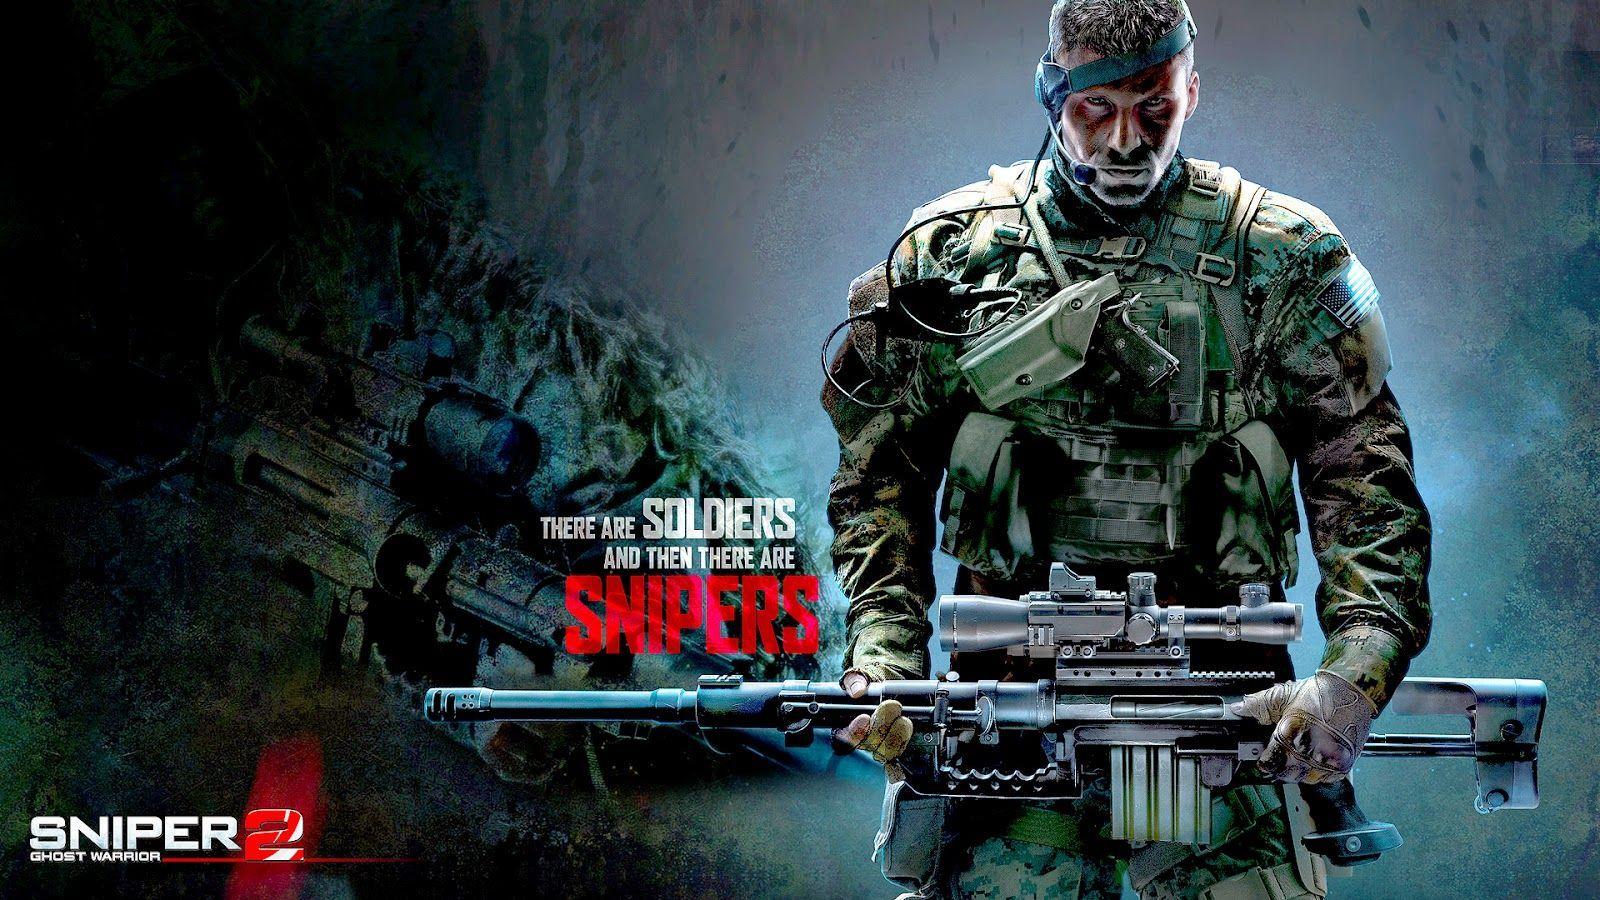 Sniper Ghost Warrior Wallpaper. Latest Exclusive Games Games